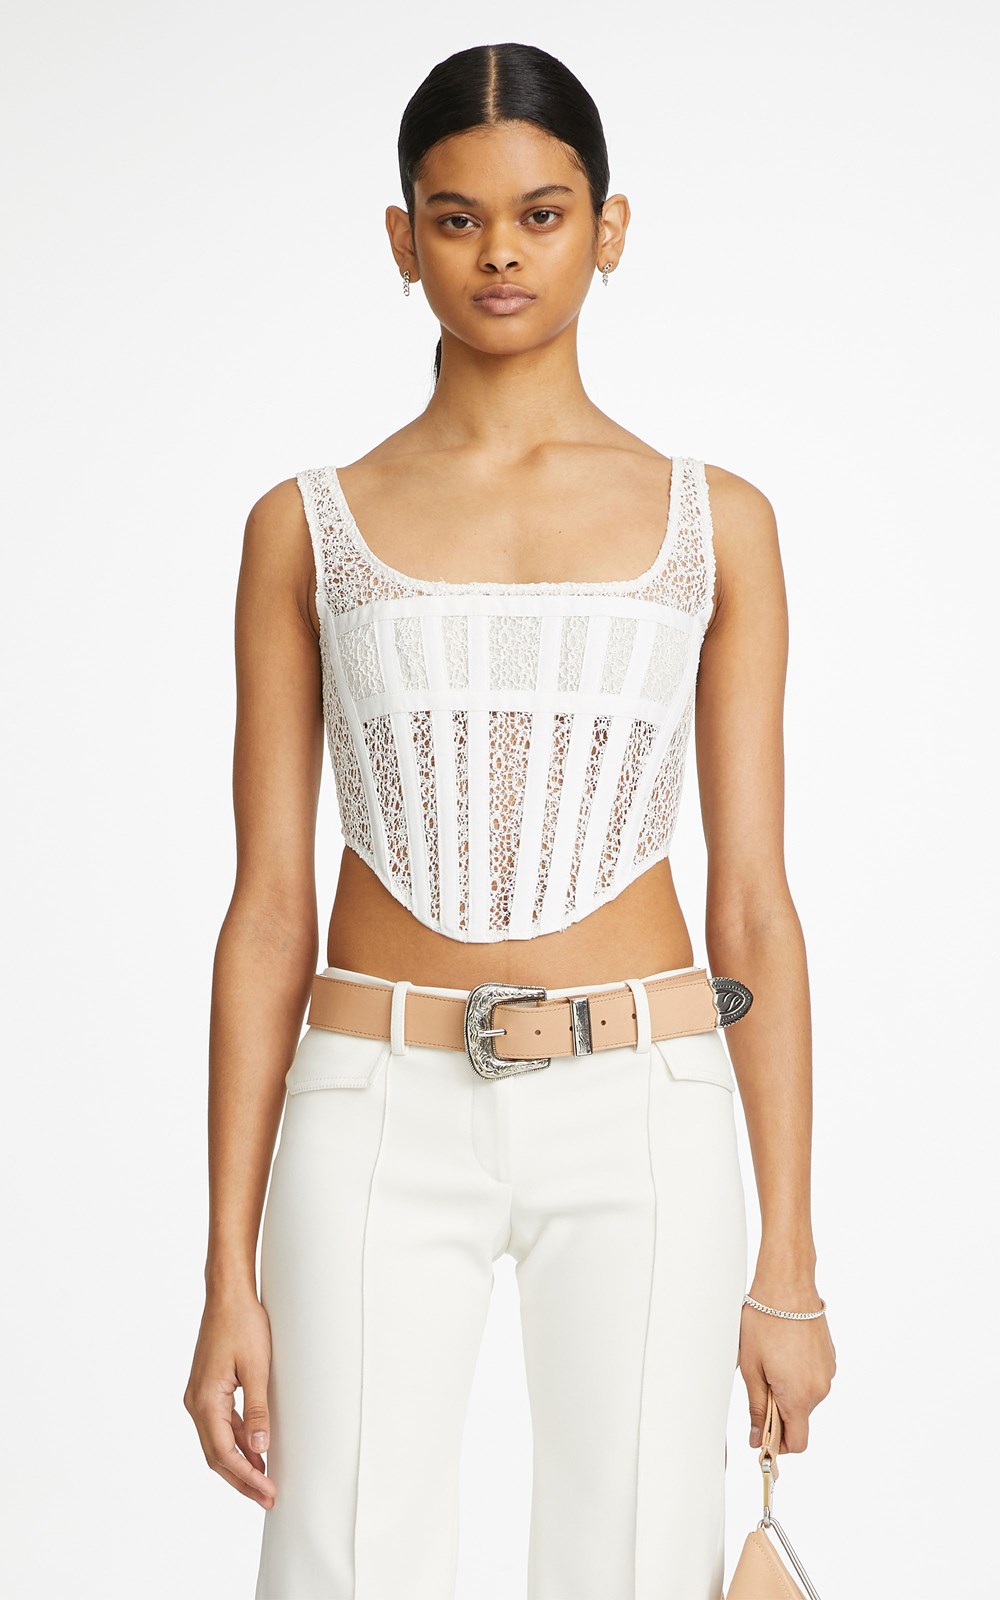 CORDED LACE CORSET by Dion Lee